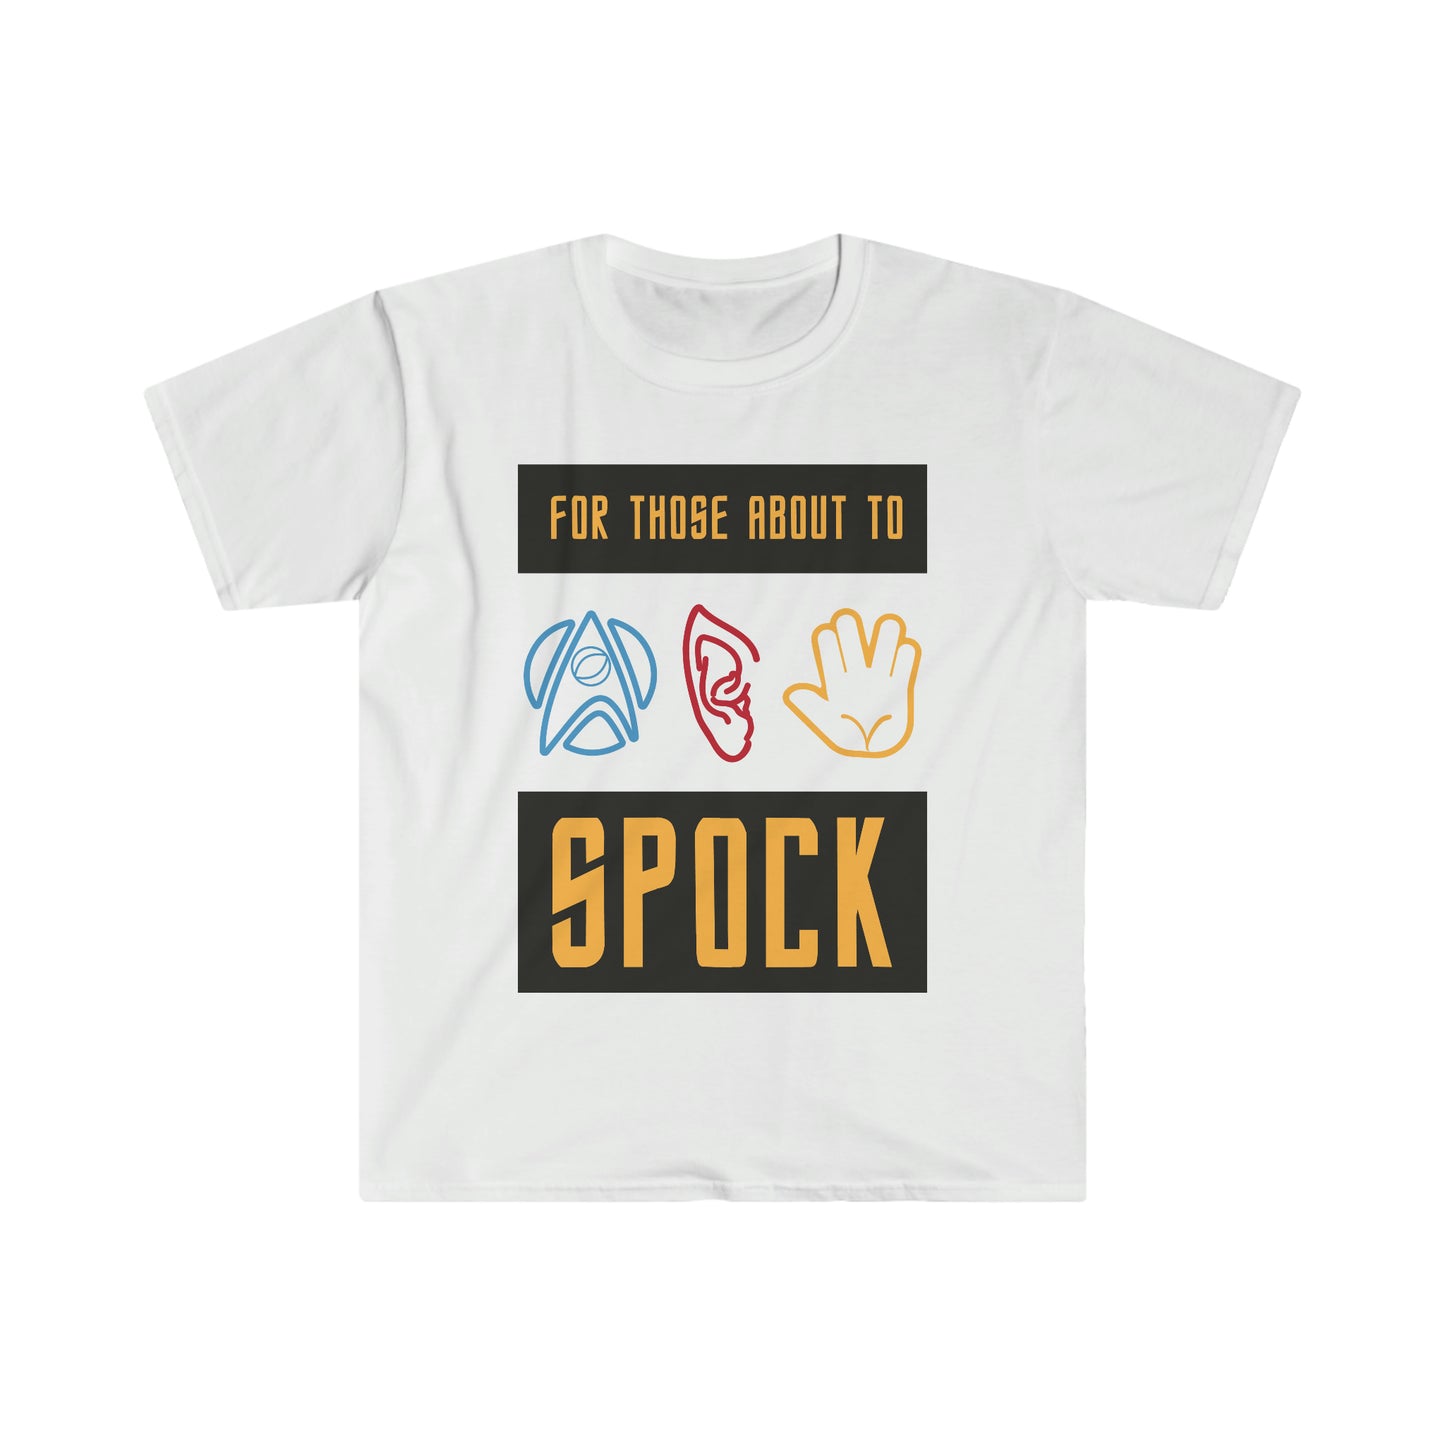 About To Spock Tee